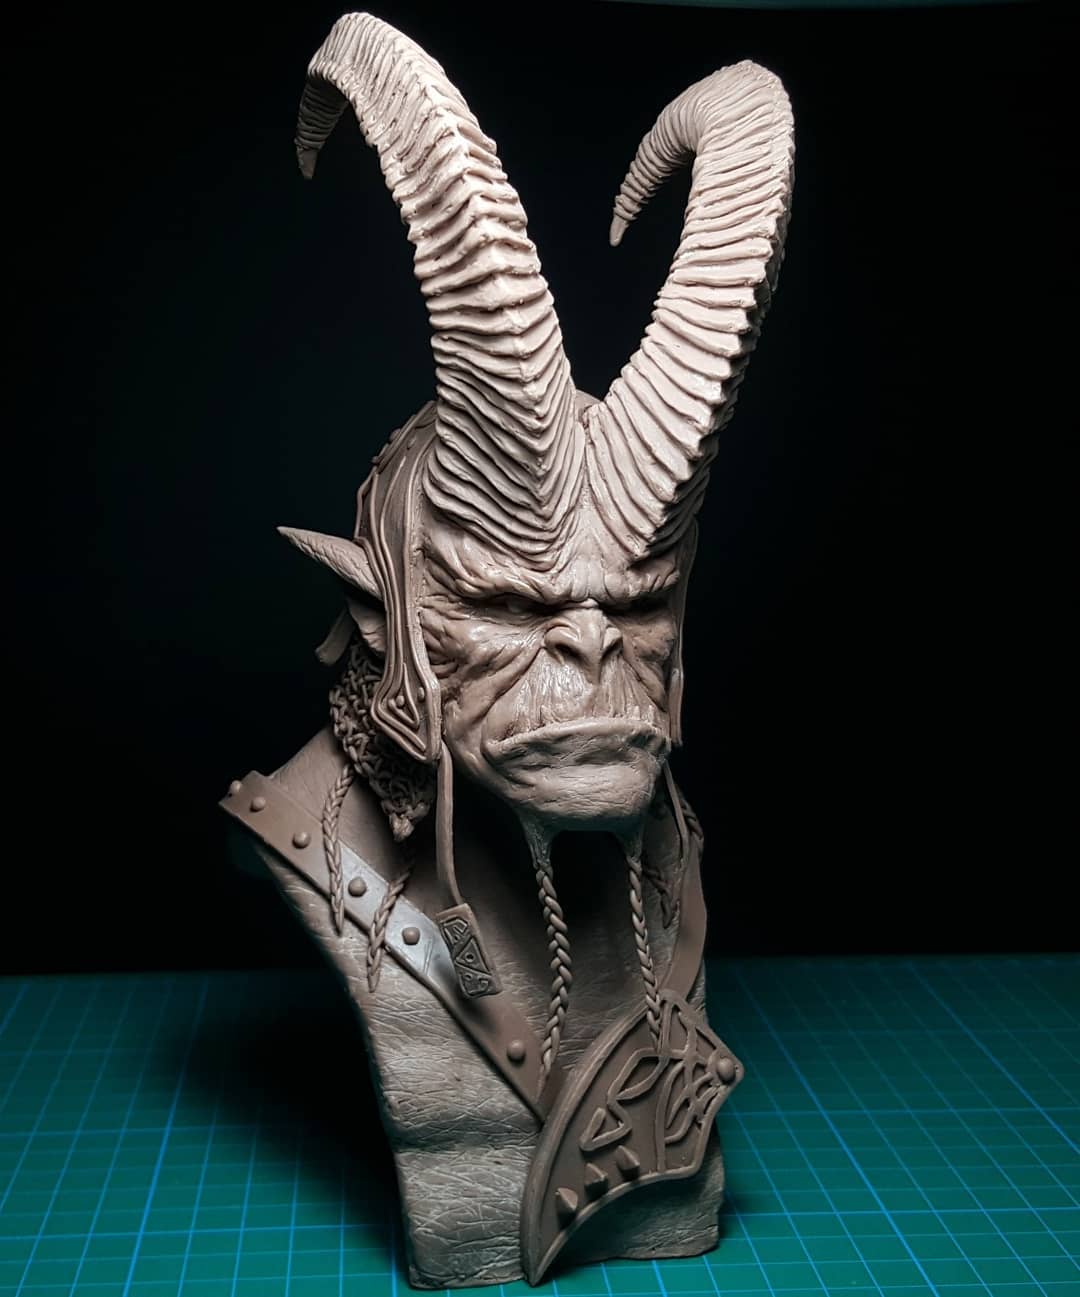 Monster Clay - Monster Clay Sculpt of the Day 01/07/19 📷 :  @monsterman03gmail #art #characterdesign #clay #claysculpture  #ilovemonsterclay #mcsotd #monster #monsterart #monsterclay #monstermakers  # oilbasedclay #oilclay #sculpting #sculptoftheday